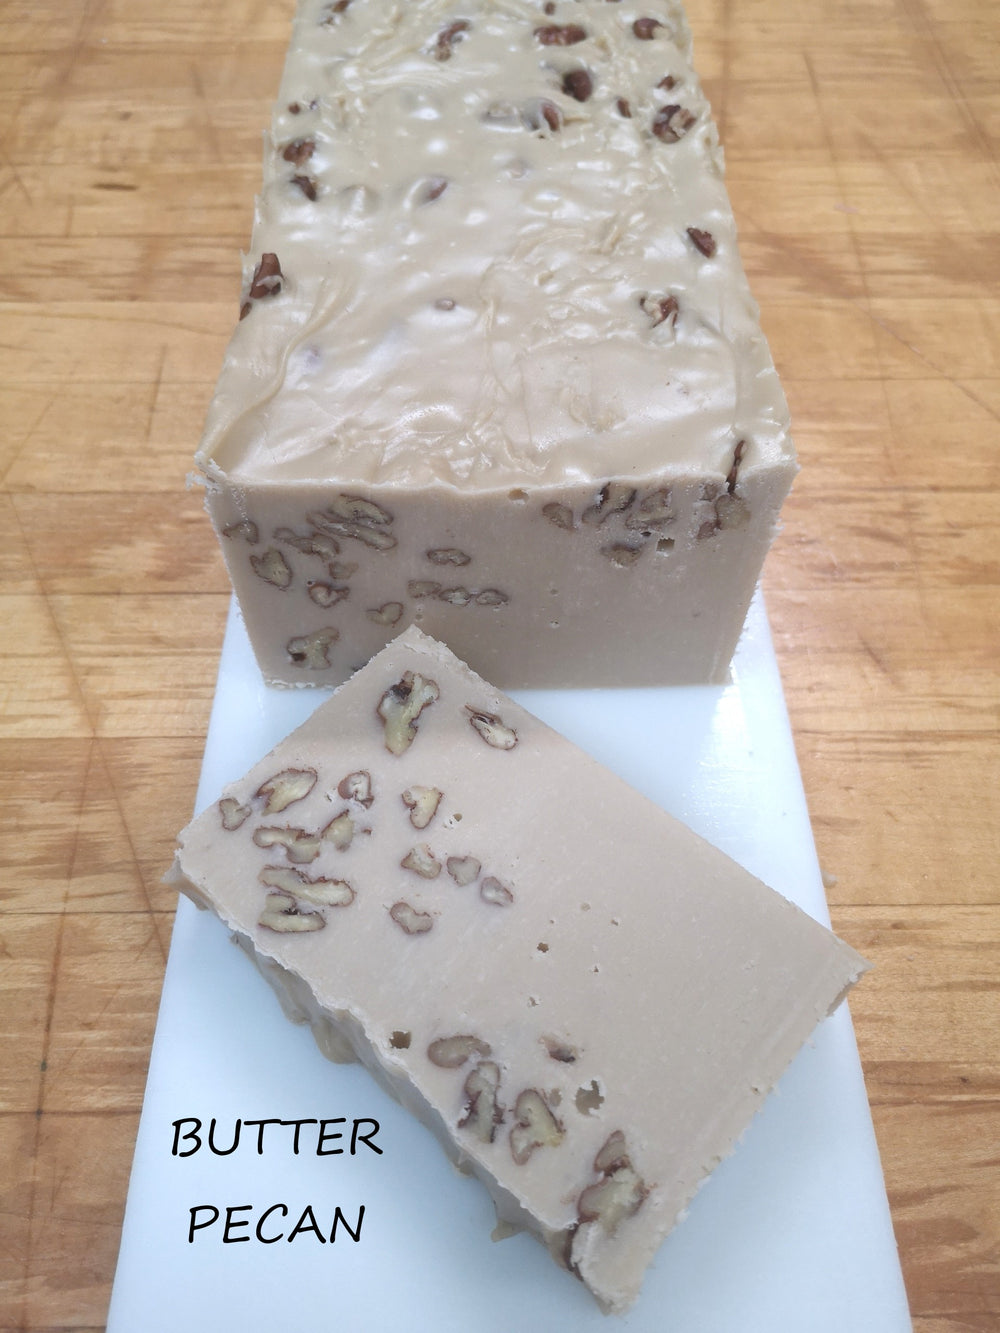 10 Butter Pecan -1/2 lb. Deli Containers - $41.25